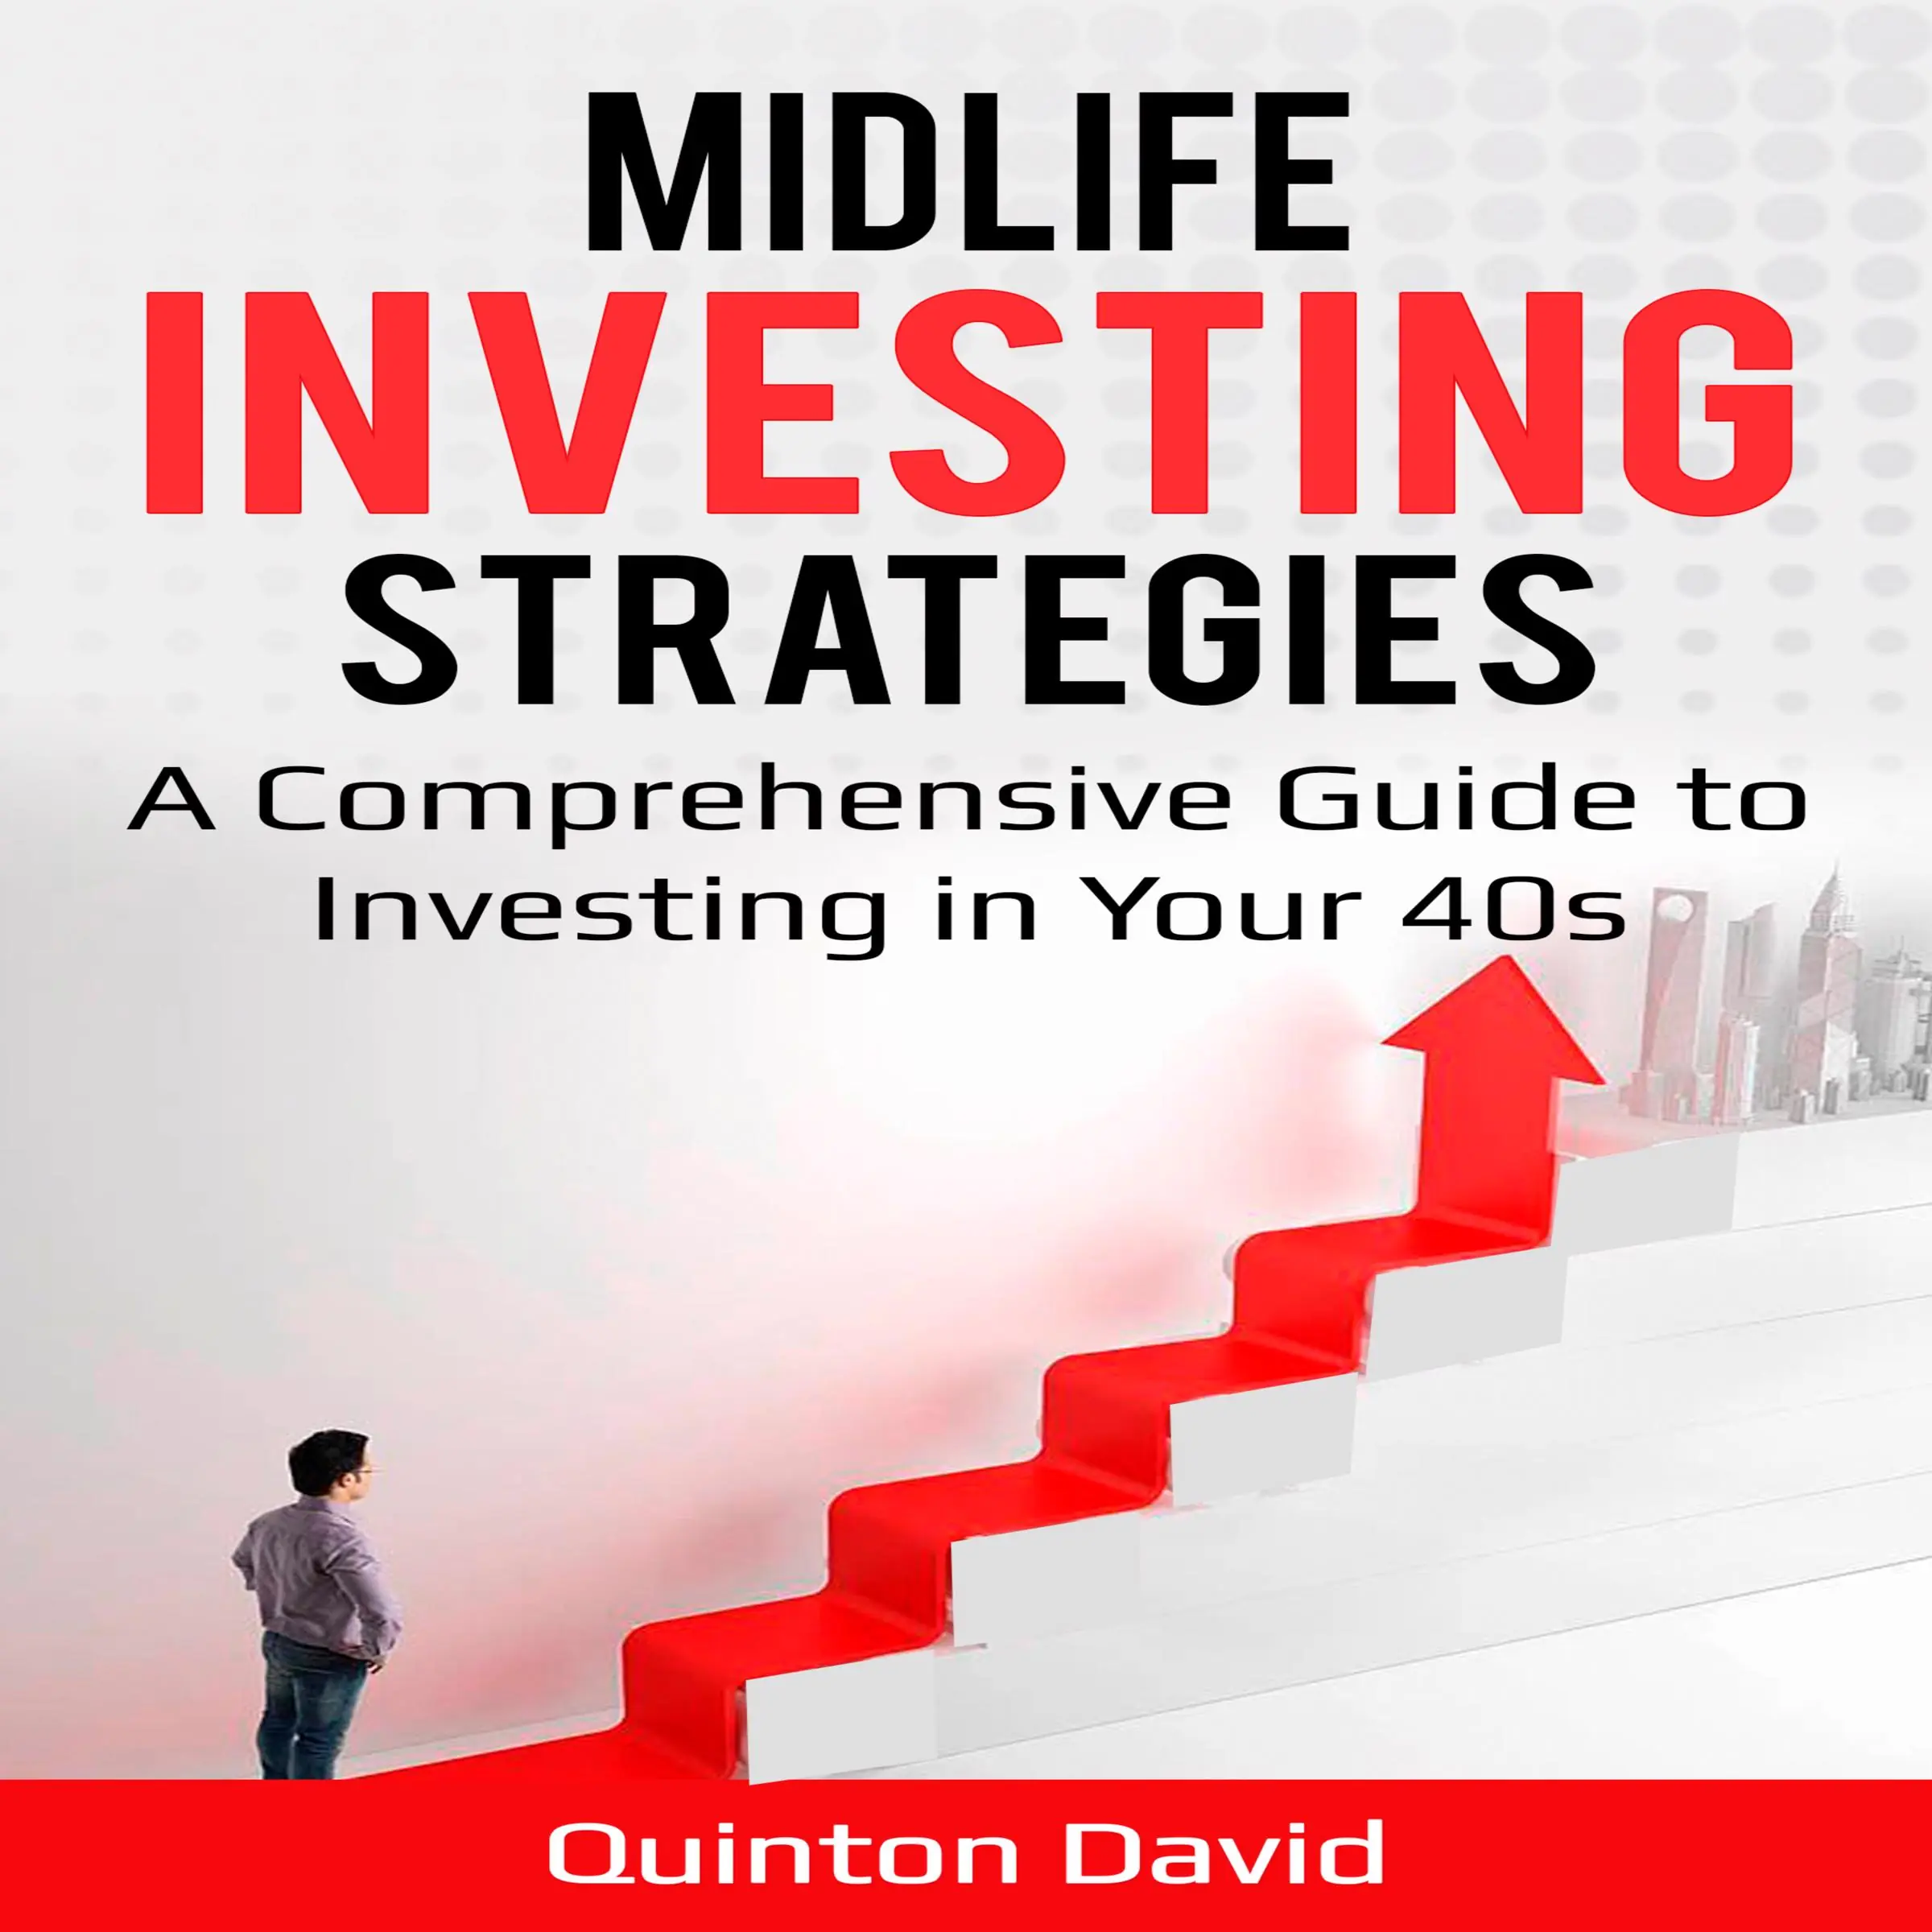 Midlife Investing Strategies A Comprehensive Guide to Investing in Your 40s Audiobook by Quinton David